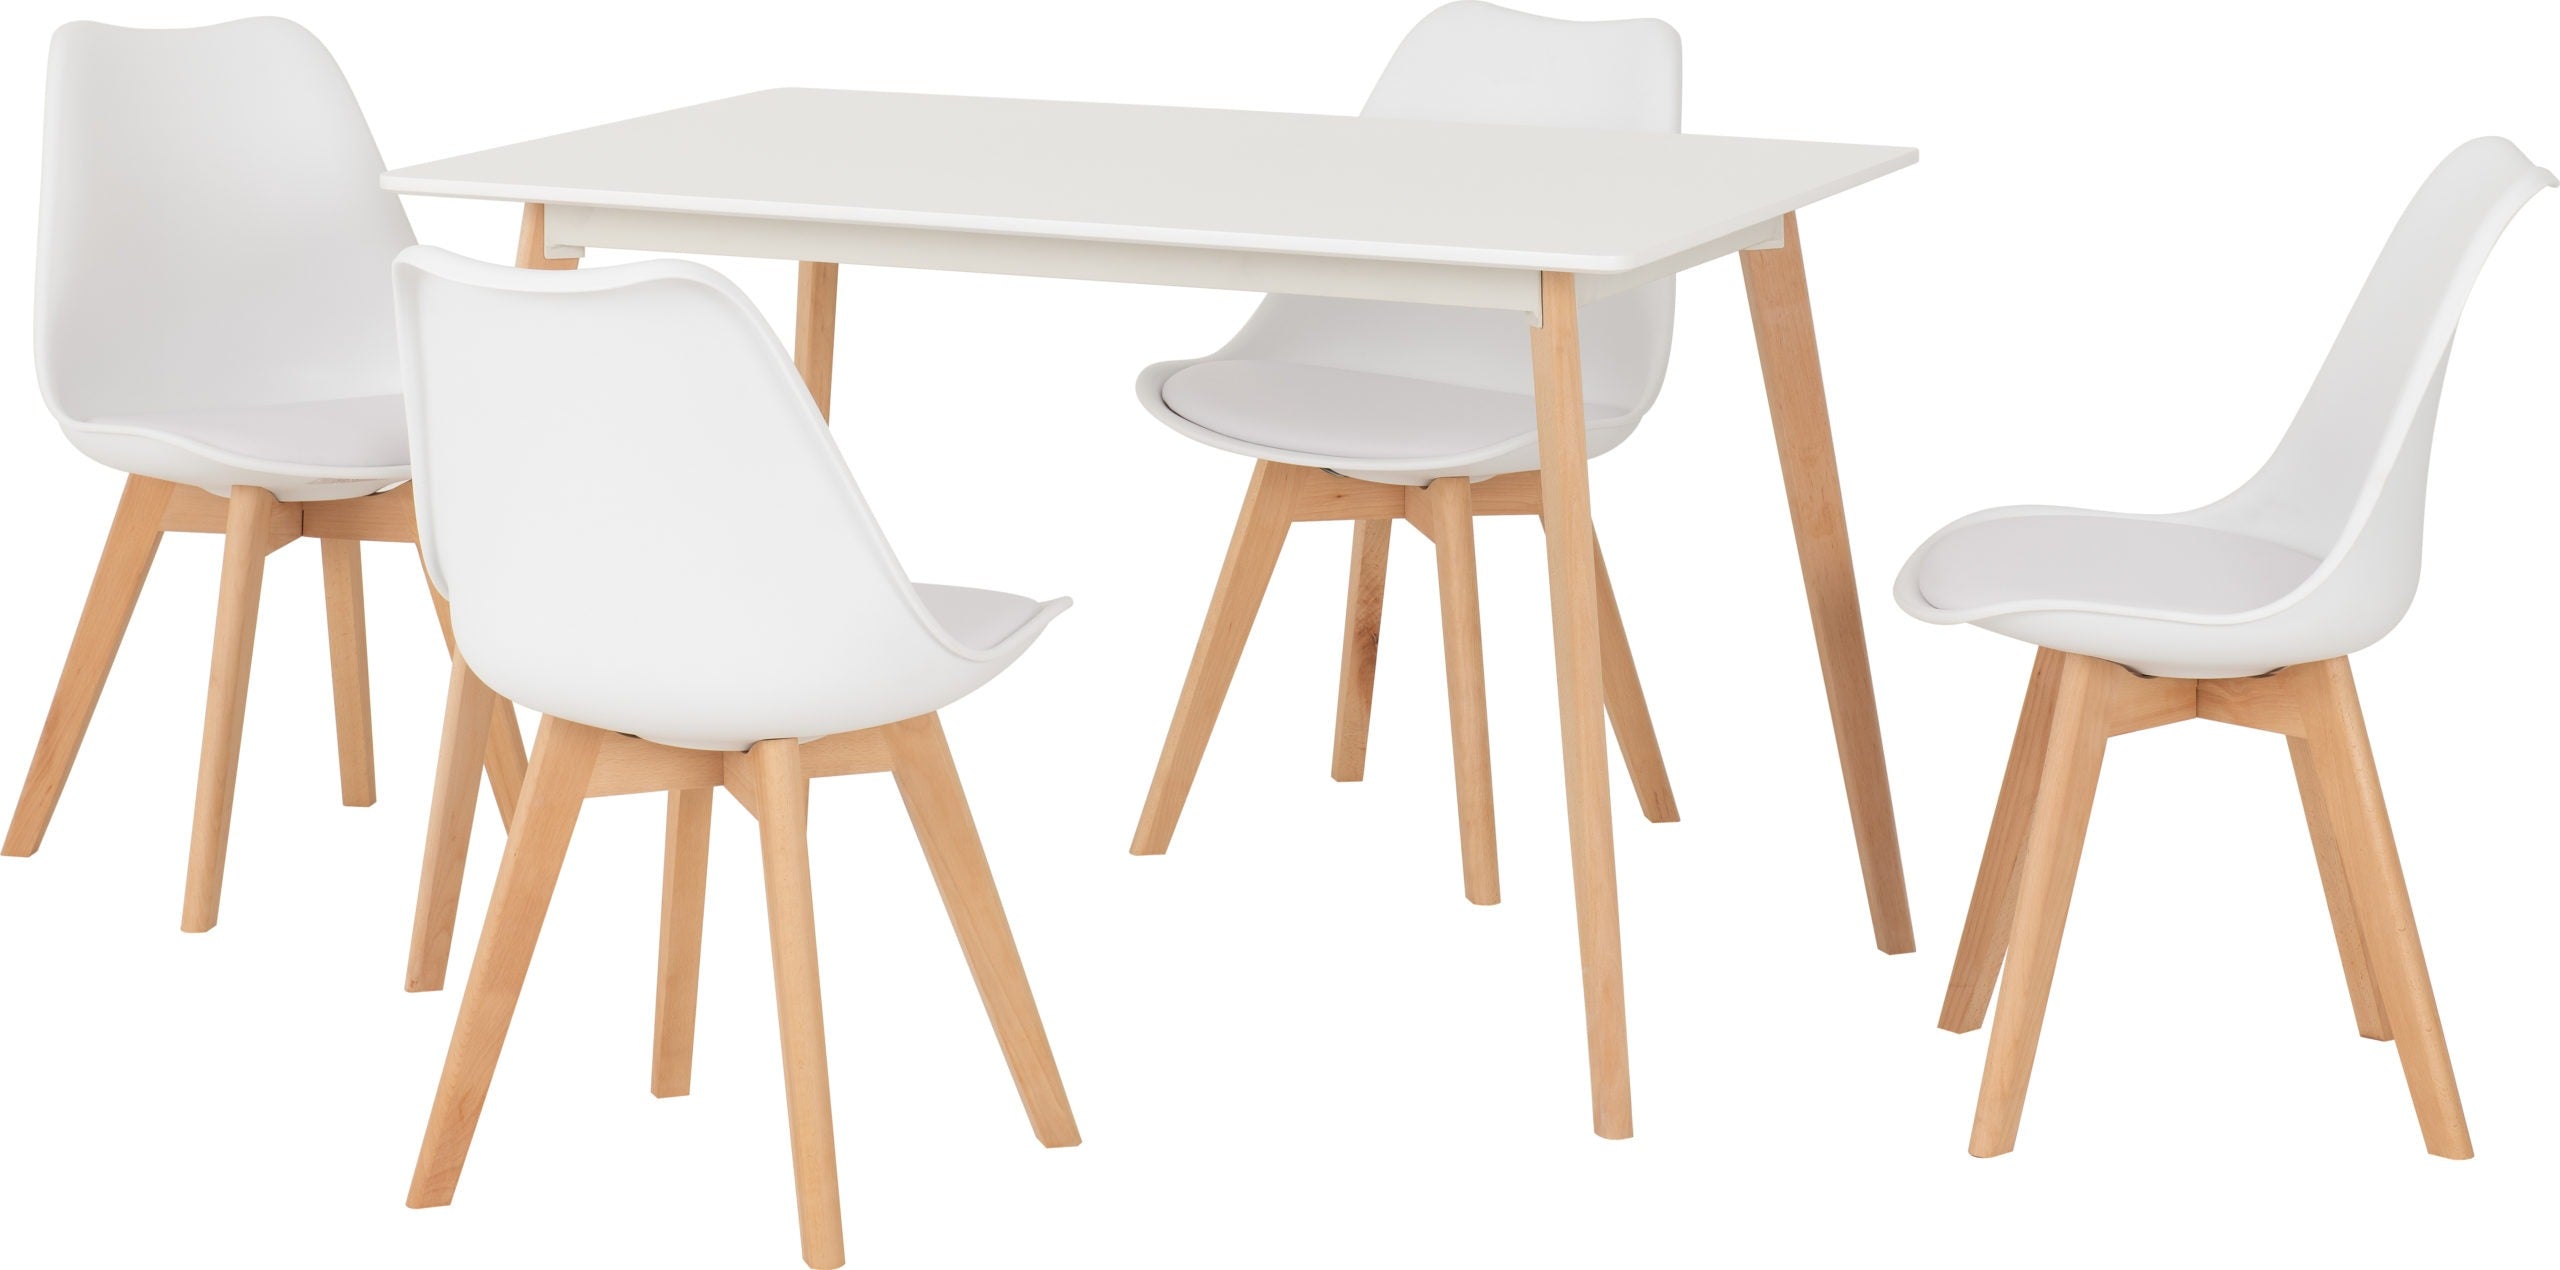 Bendal Dining Table in White and Beech Finish